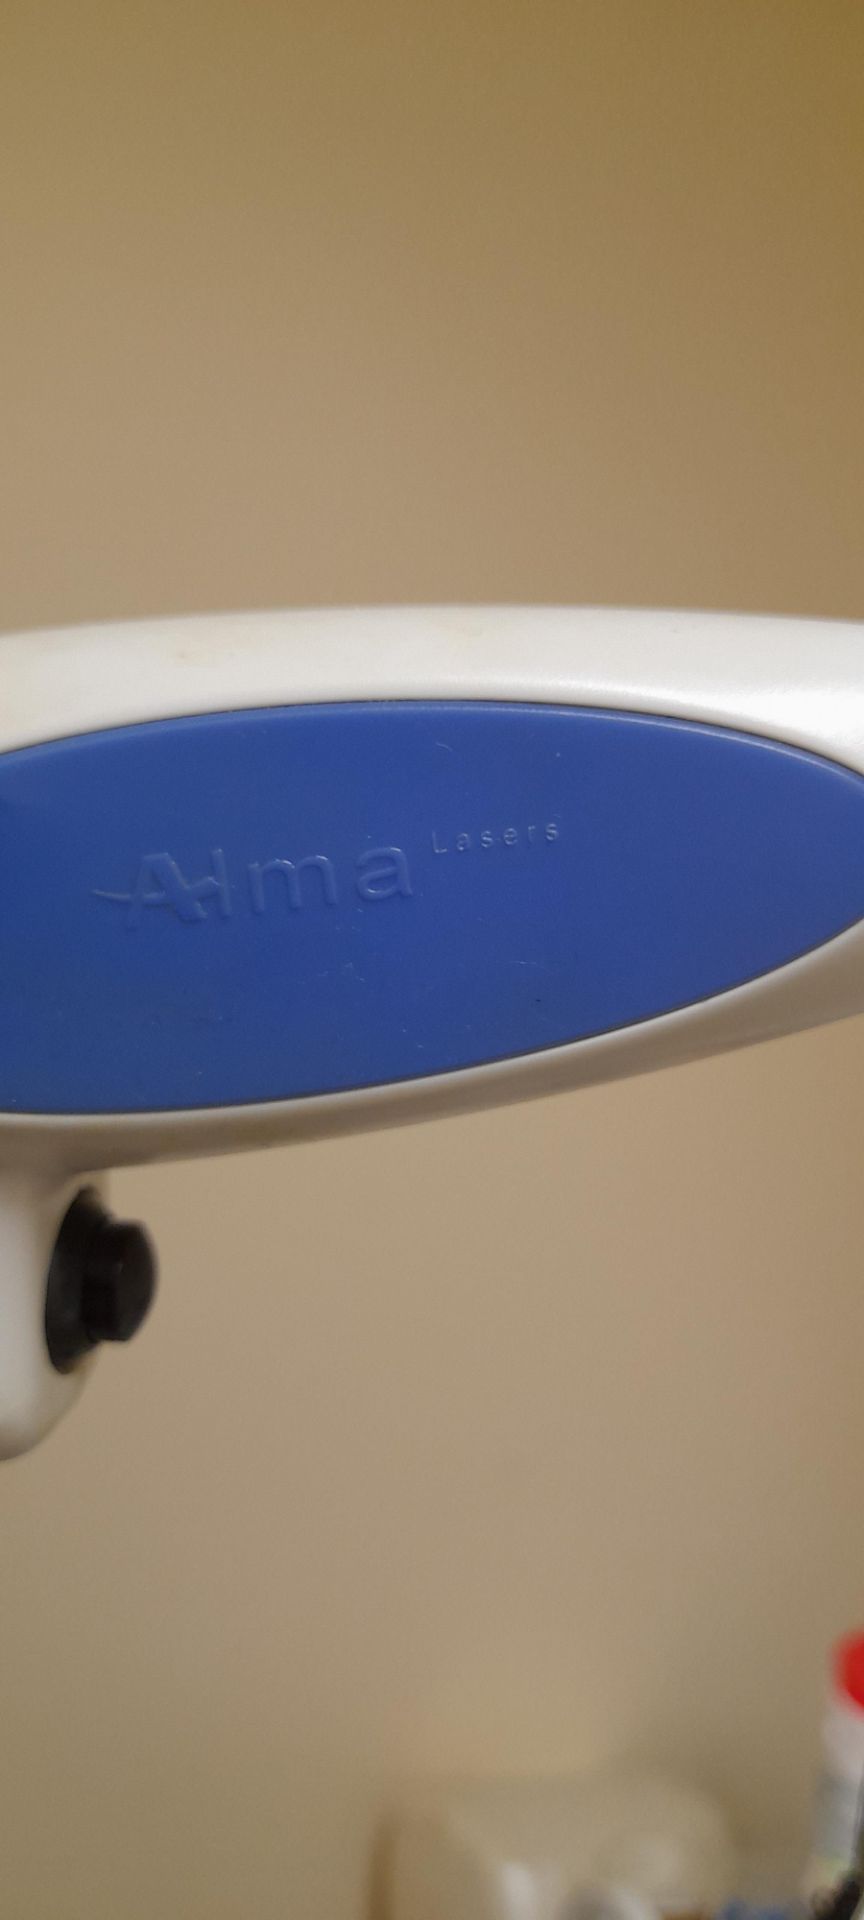 Alma Lasers Accent XL radiofrequency system, non-invasive body contouring and skin lightening - Image 7 of 8